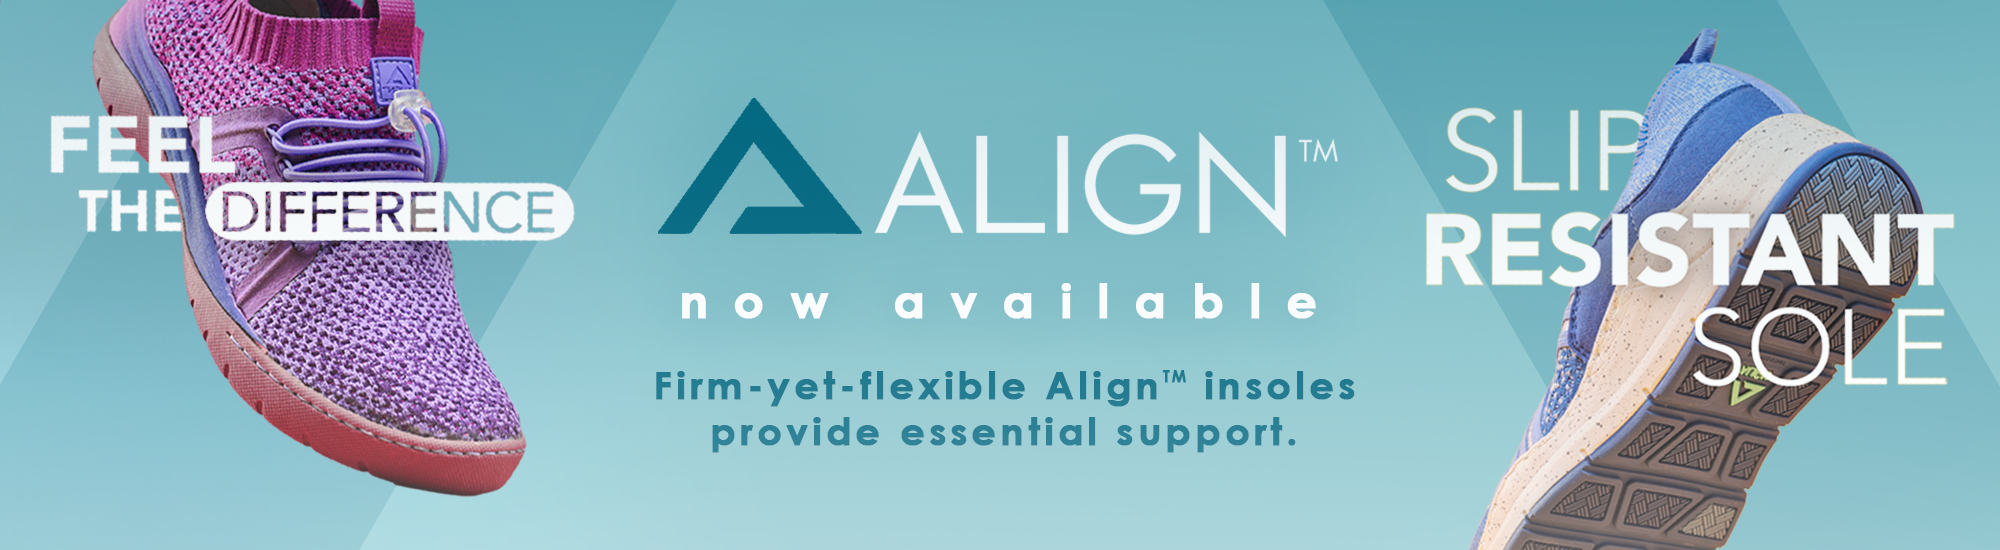 Align Shoes Now Available